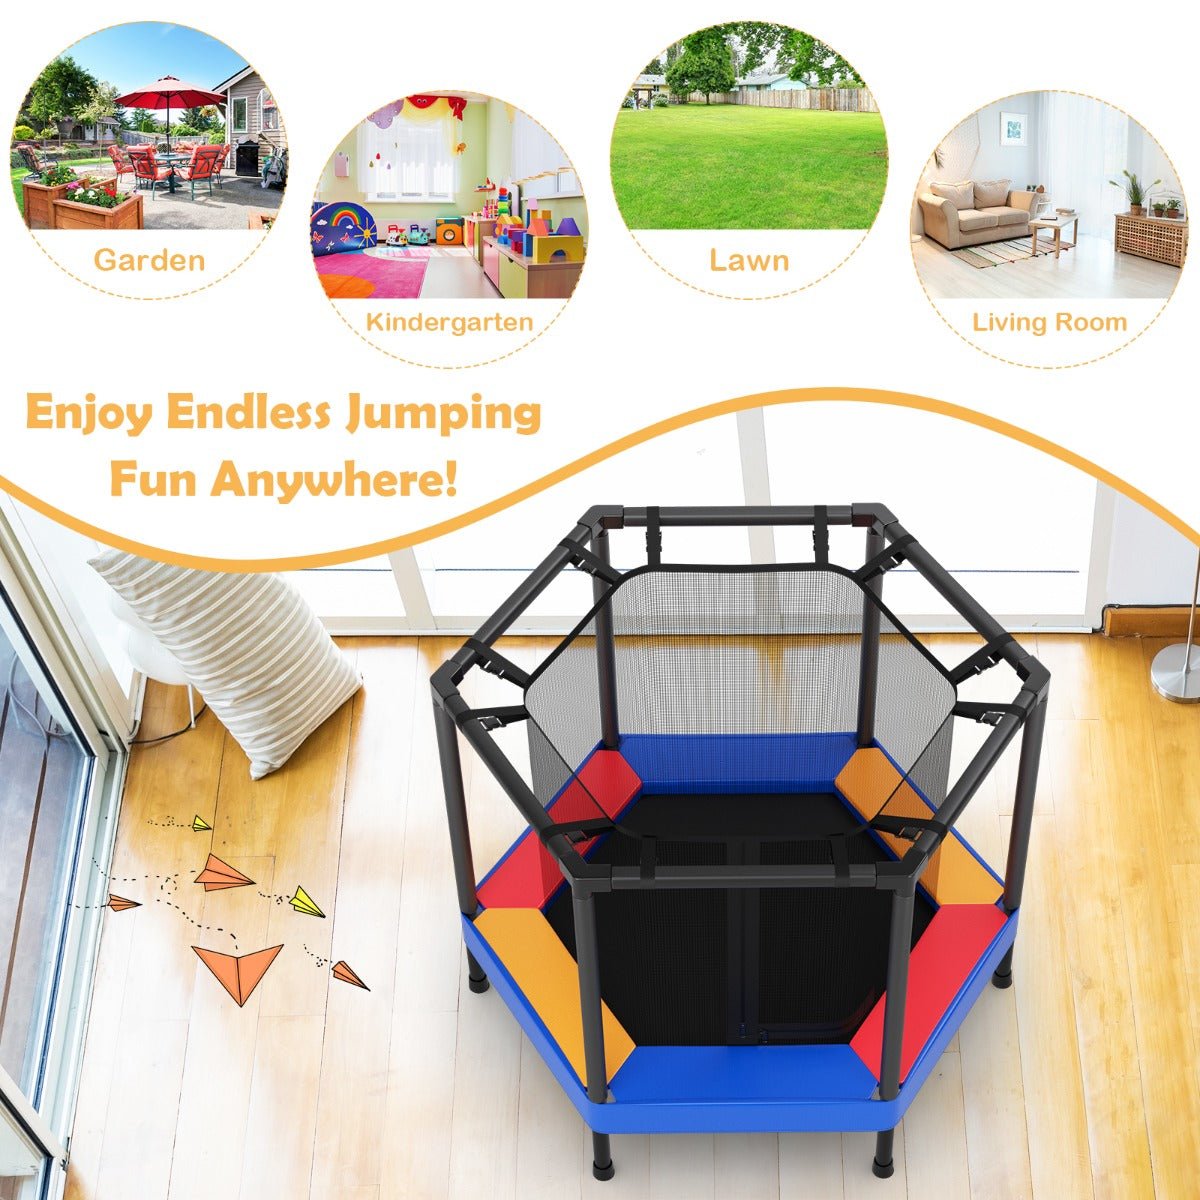 Secure Outdoor Play: 48 Inches Kids Trampoline with Safety Enclosure Net